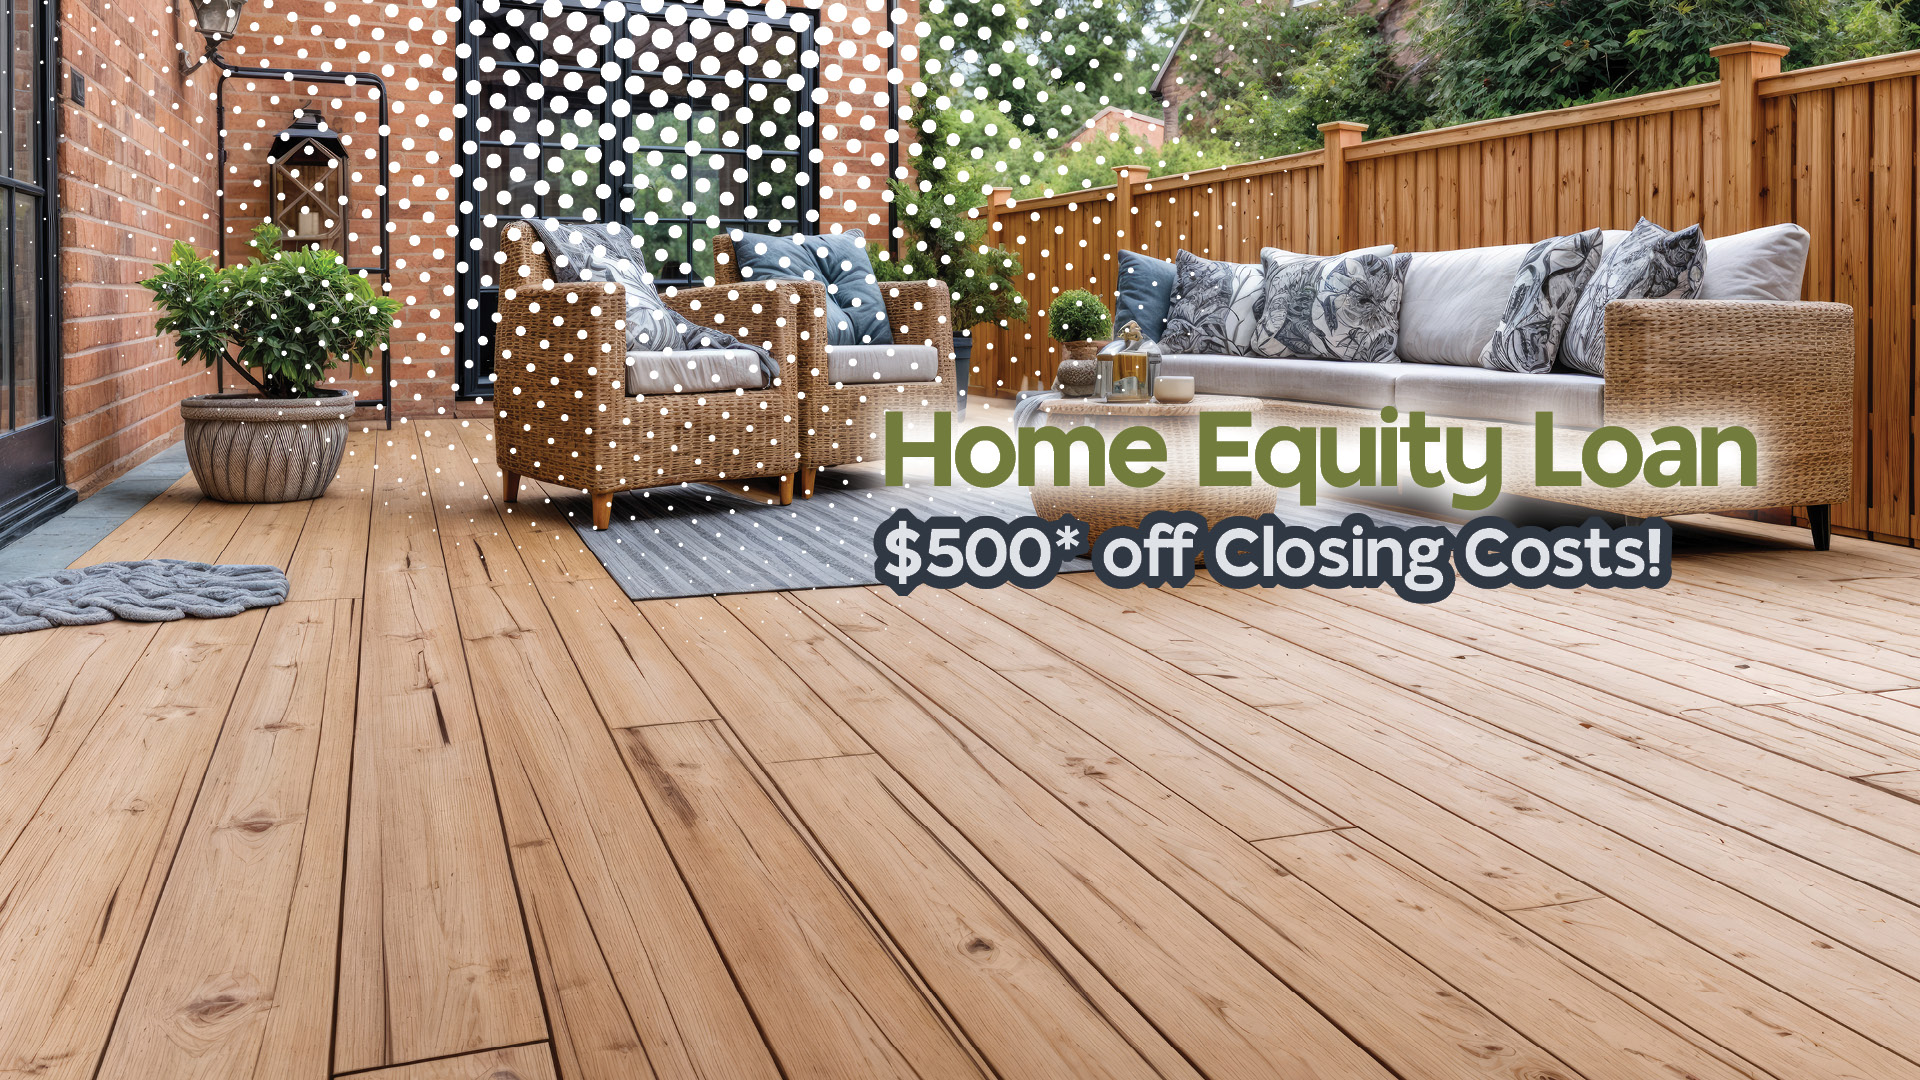 Home Equity Loan, $500* off Closing Costs